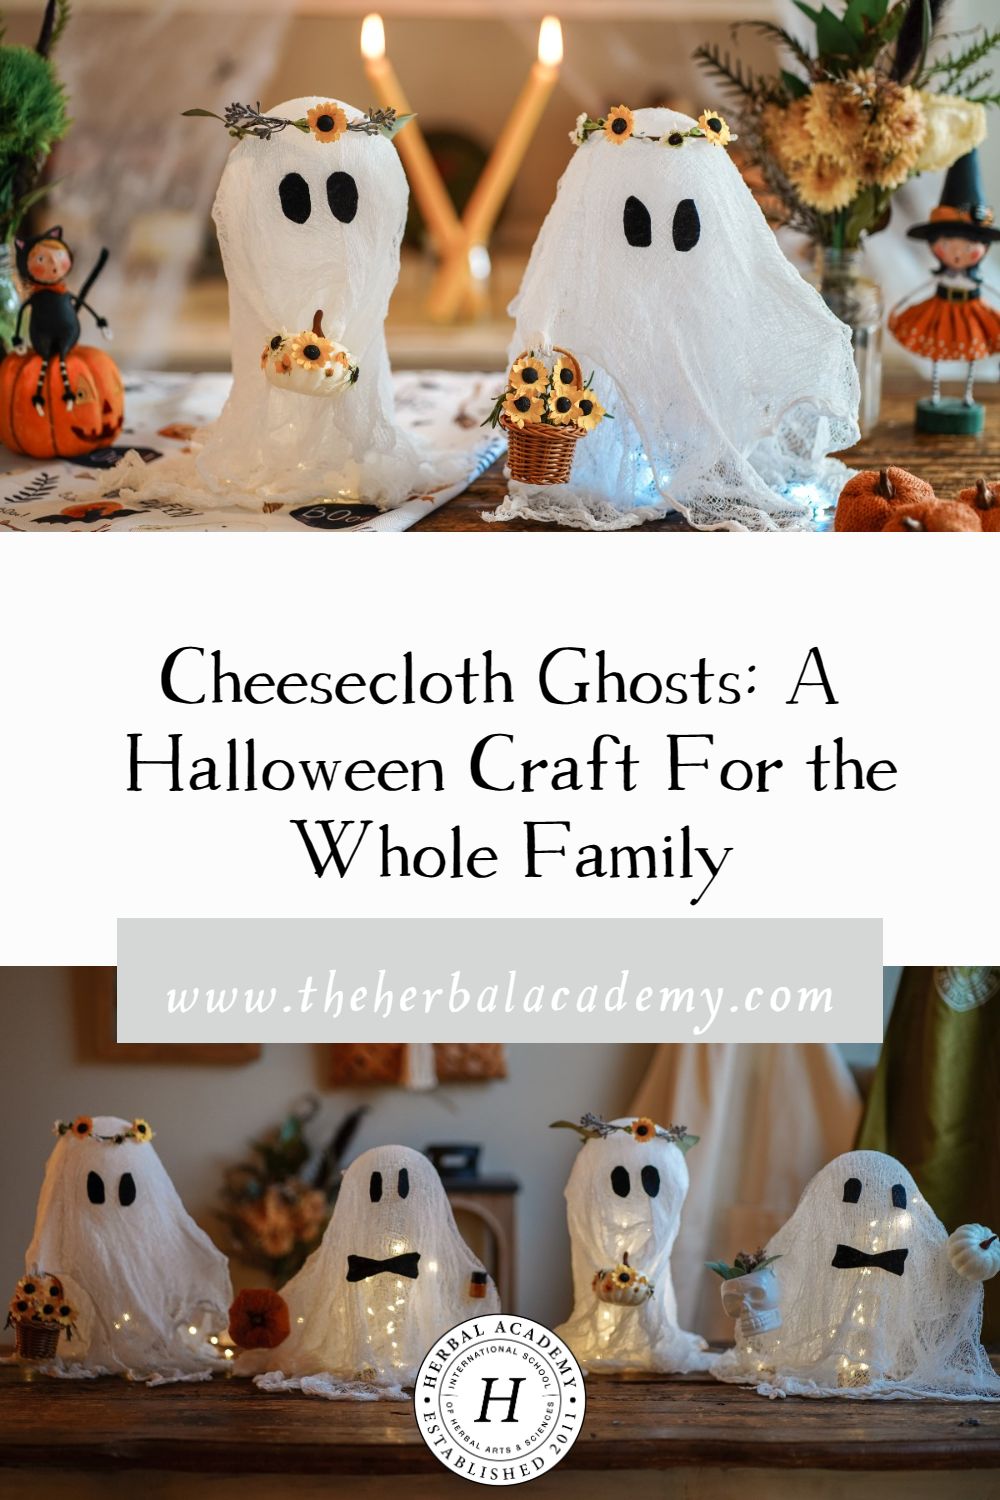 Cheesecloth Ghosts: A Halloween Craft For The Whole Family | Herbal Academy | Roll out the cheesecloth, and get ready for a spooktacular fun DIY for the whole family! These cheesecloth ghosts are so cute for Halloween.